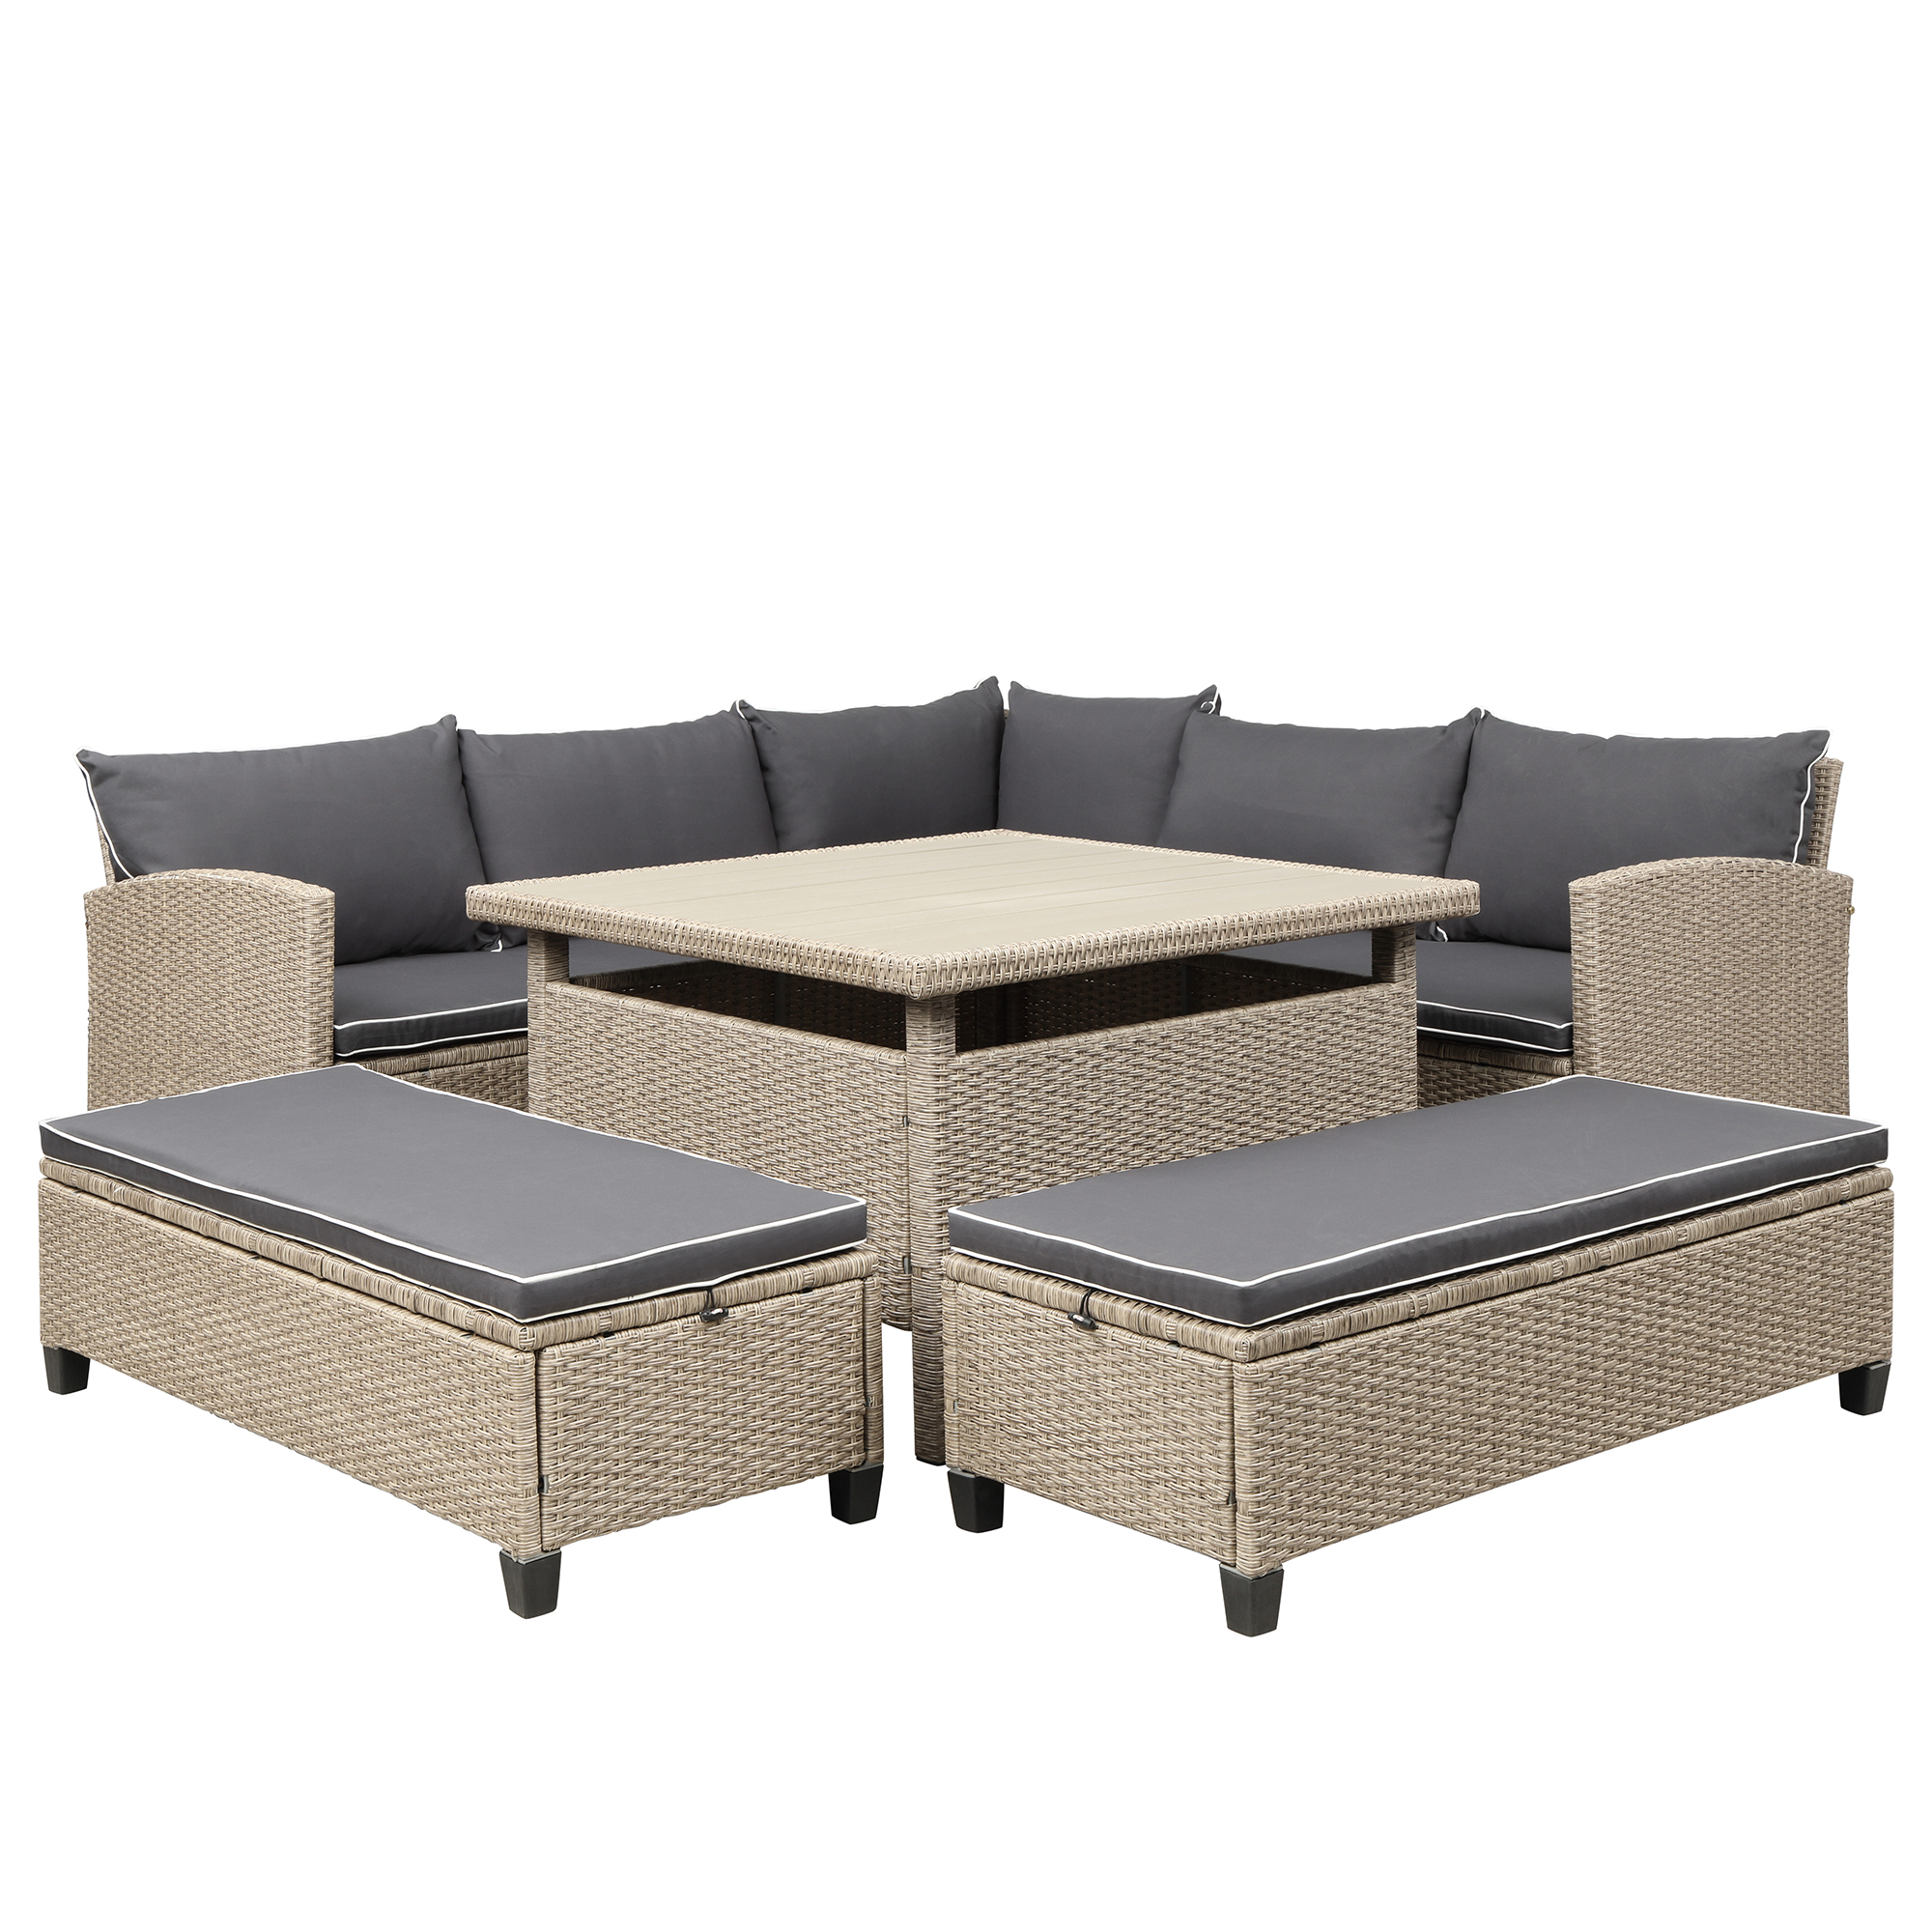 6-Piece Patio Furniture Set Outdoor Wicker Rattan Sectional Sofa with Table and Benches for Backyard, Garden, Poolside-CASAINC